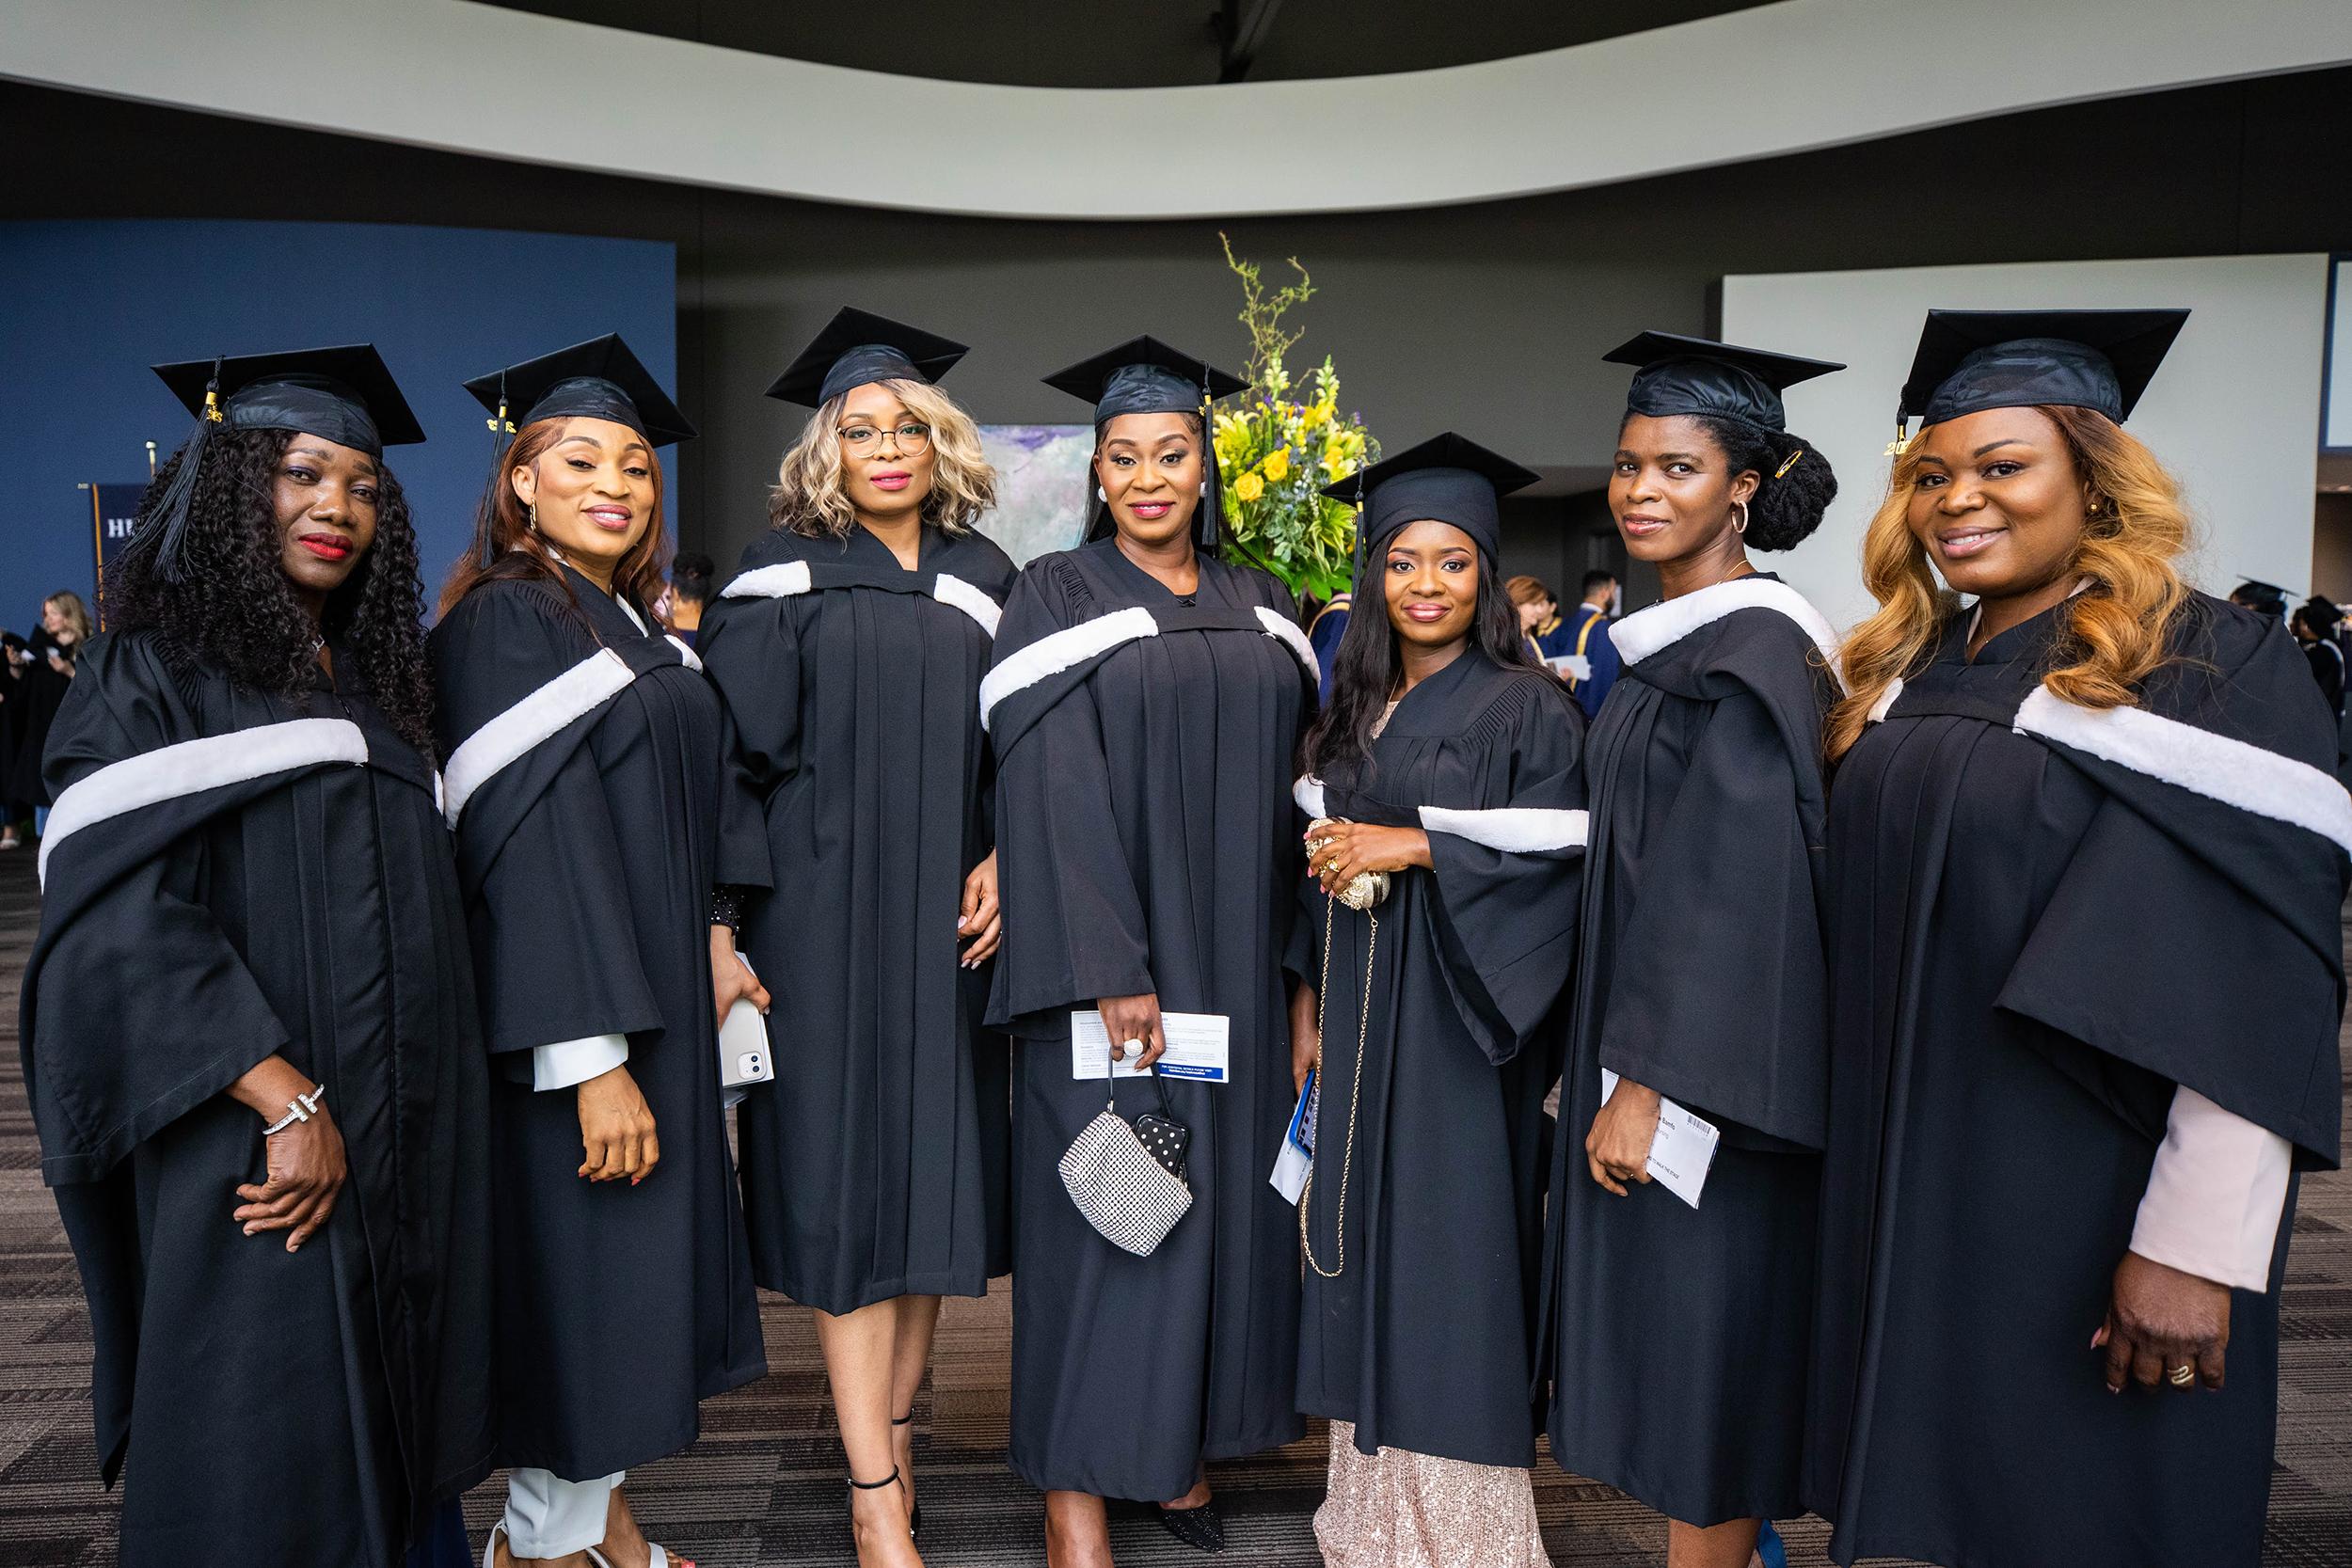 Seven people wearing graduation robes and caps pose for a photo.